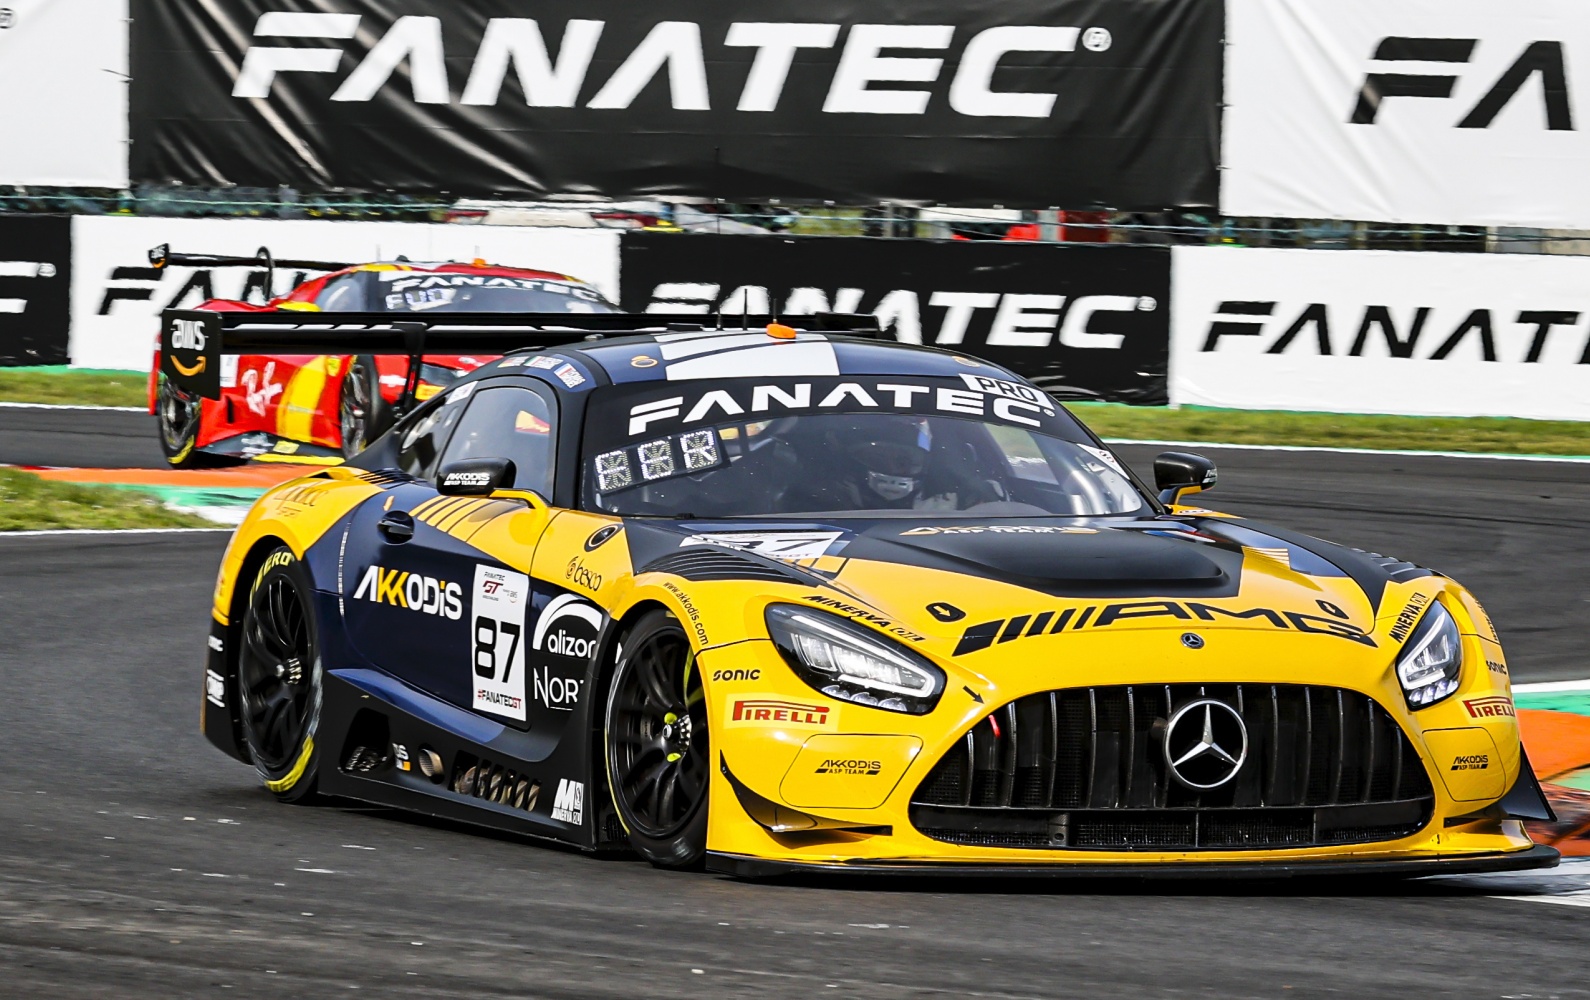 Fanatec GT World - Endurance (Monza) - Top 10 in Pro Cup!